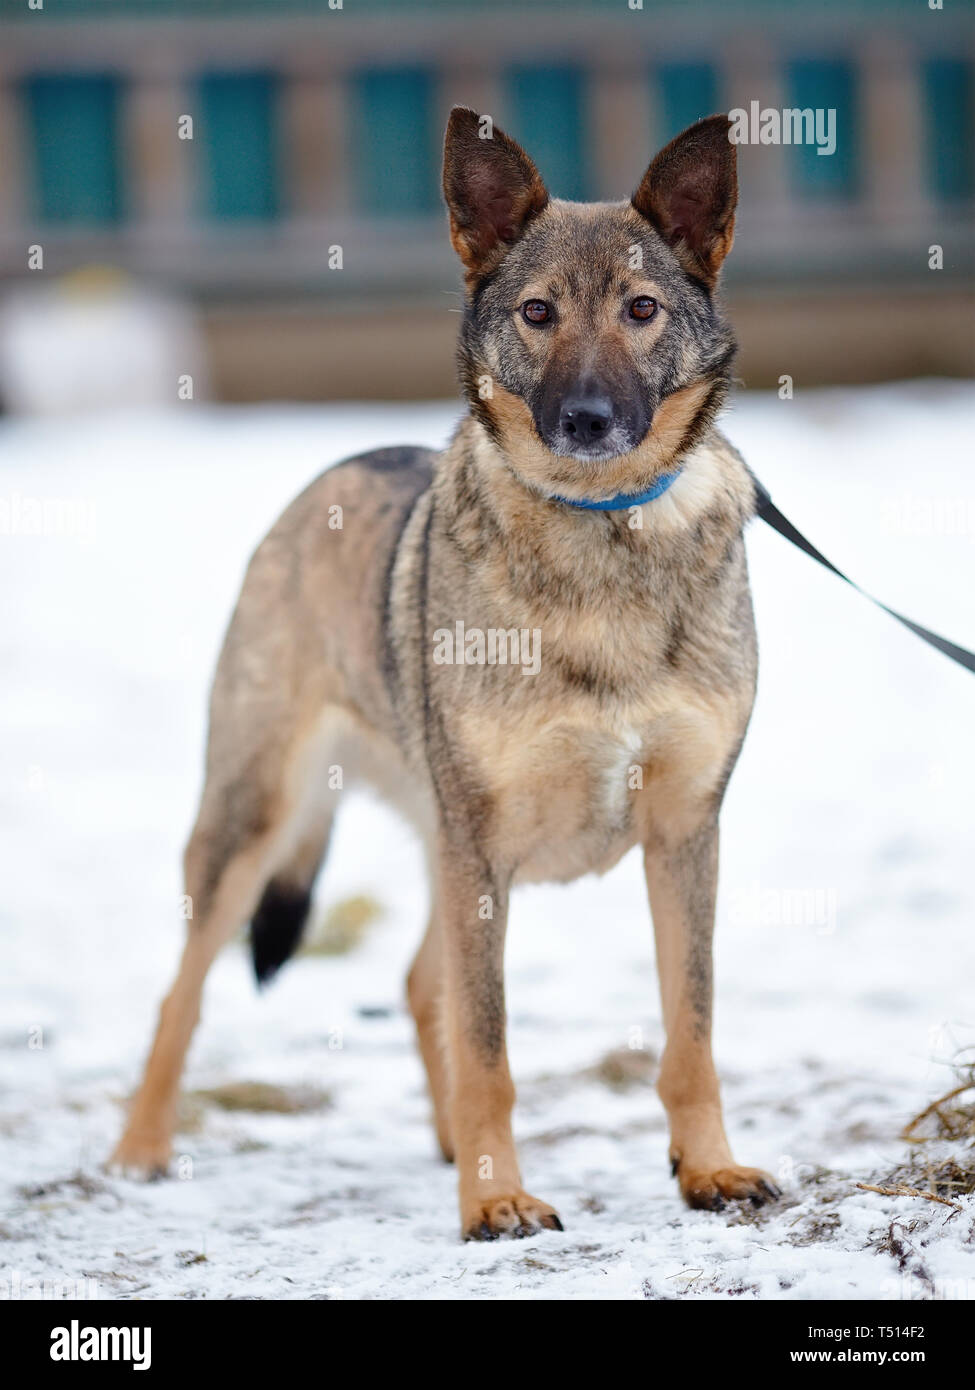 Doggie on walk. Dog on snow.  Not purebred dog. The large not purebred mongrel. Stock Photo